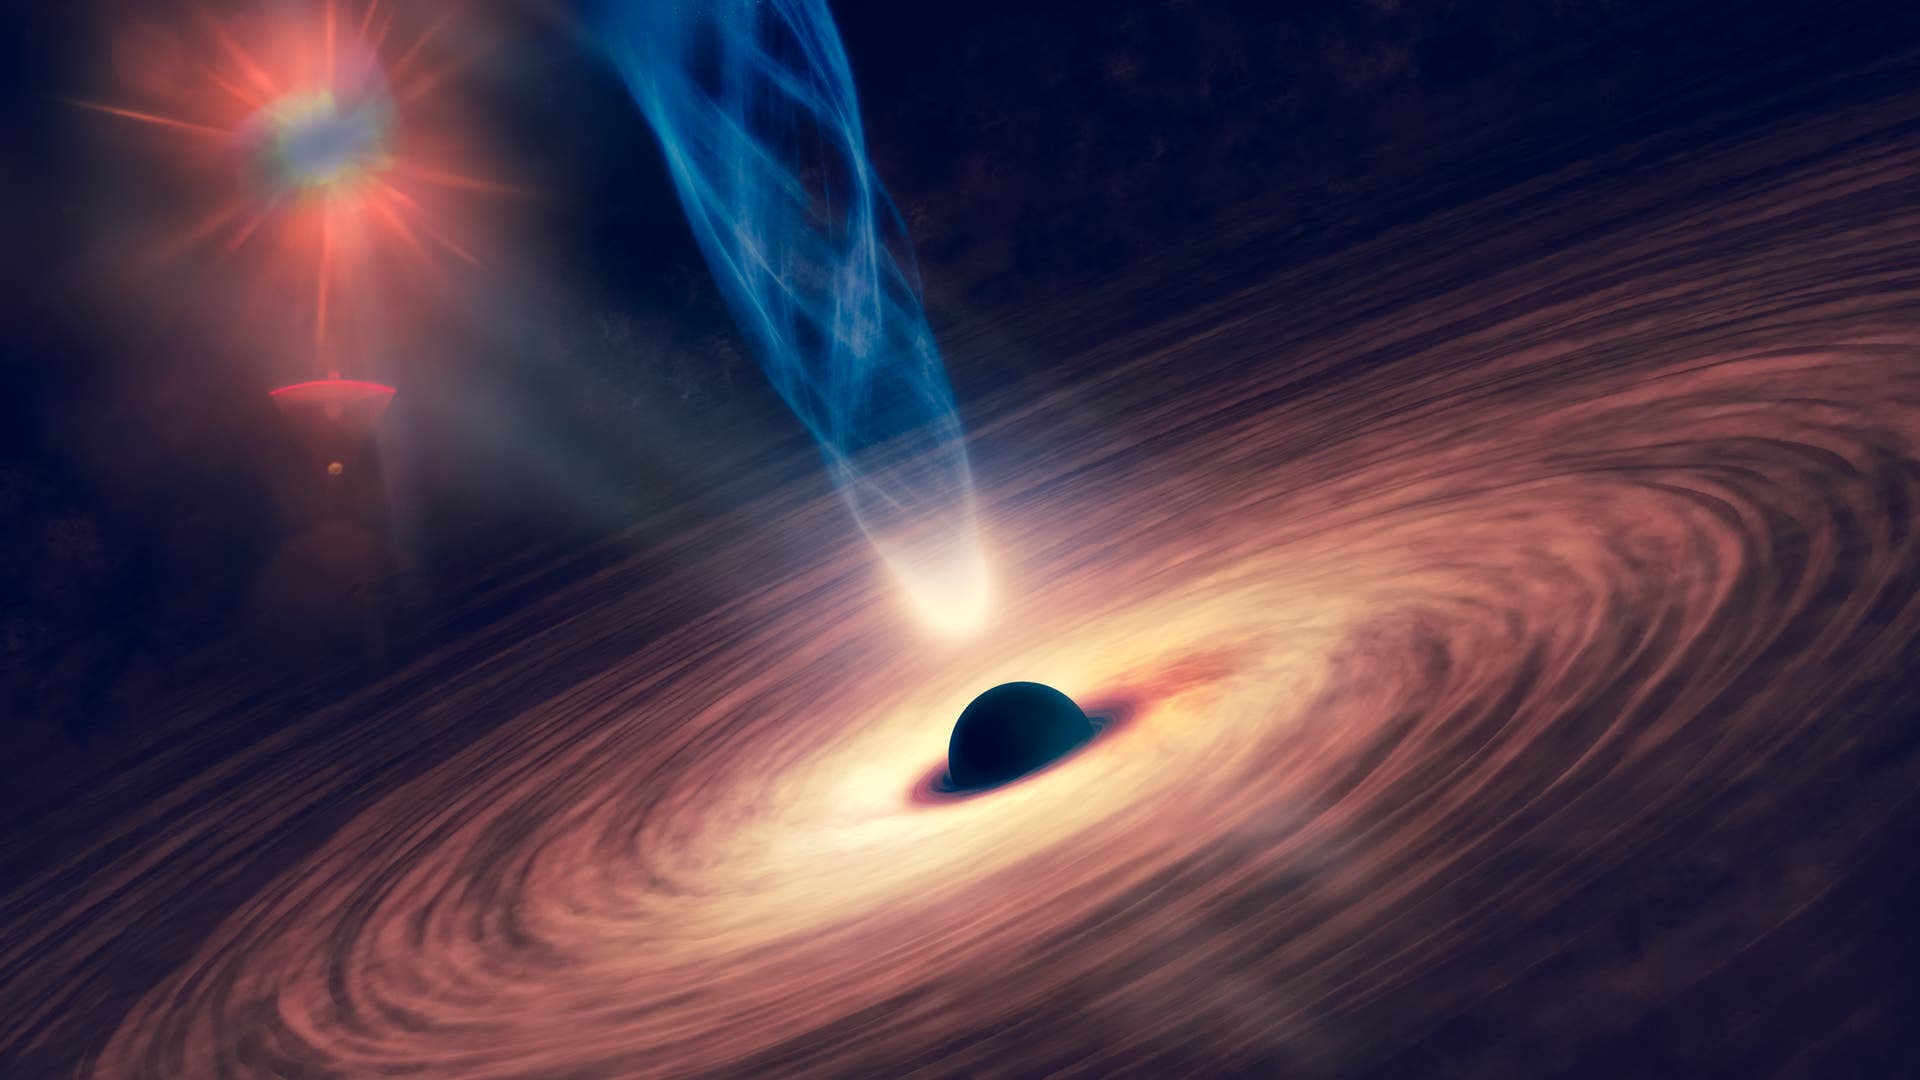 Primordial black holes: how light could they be?